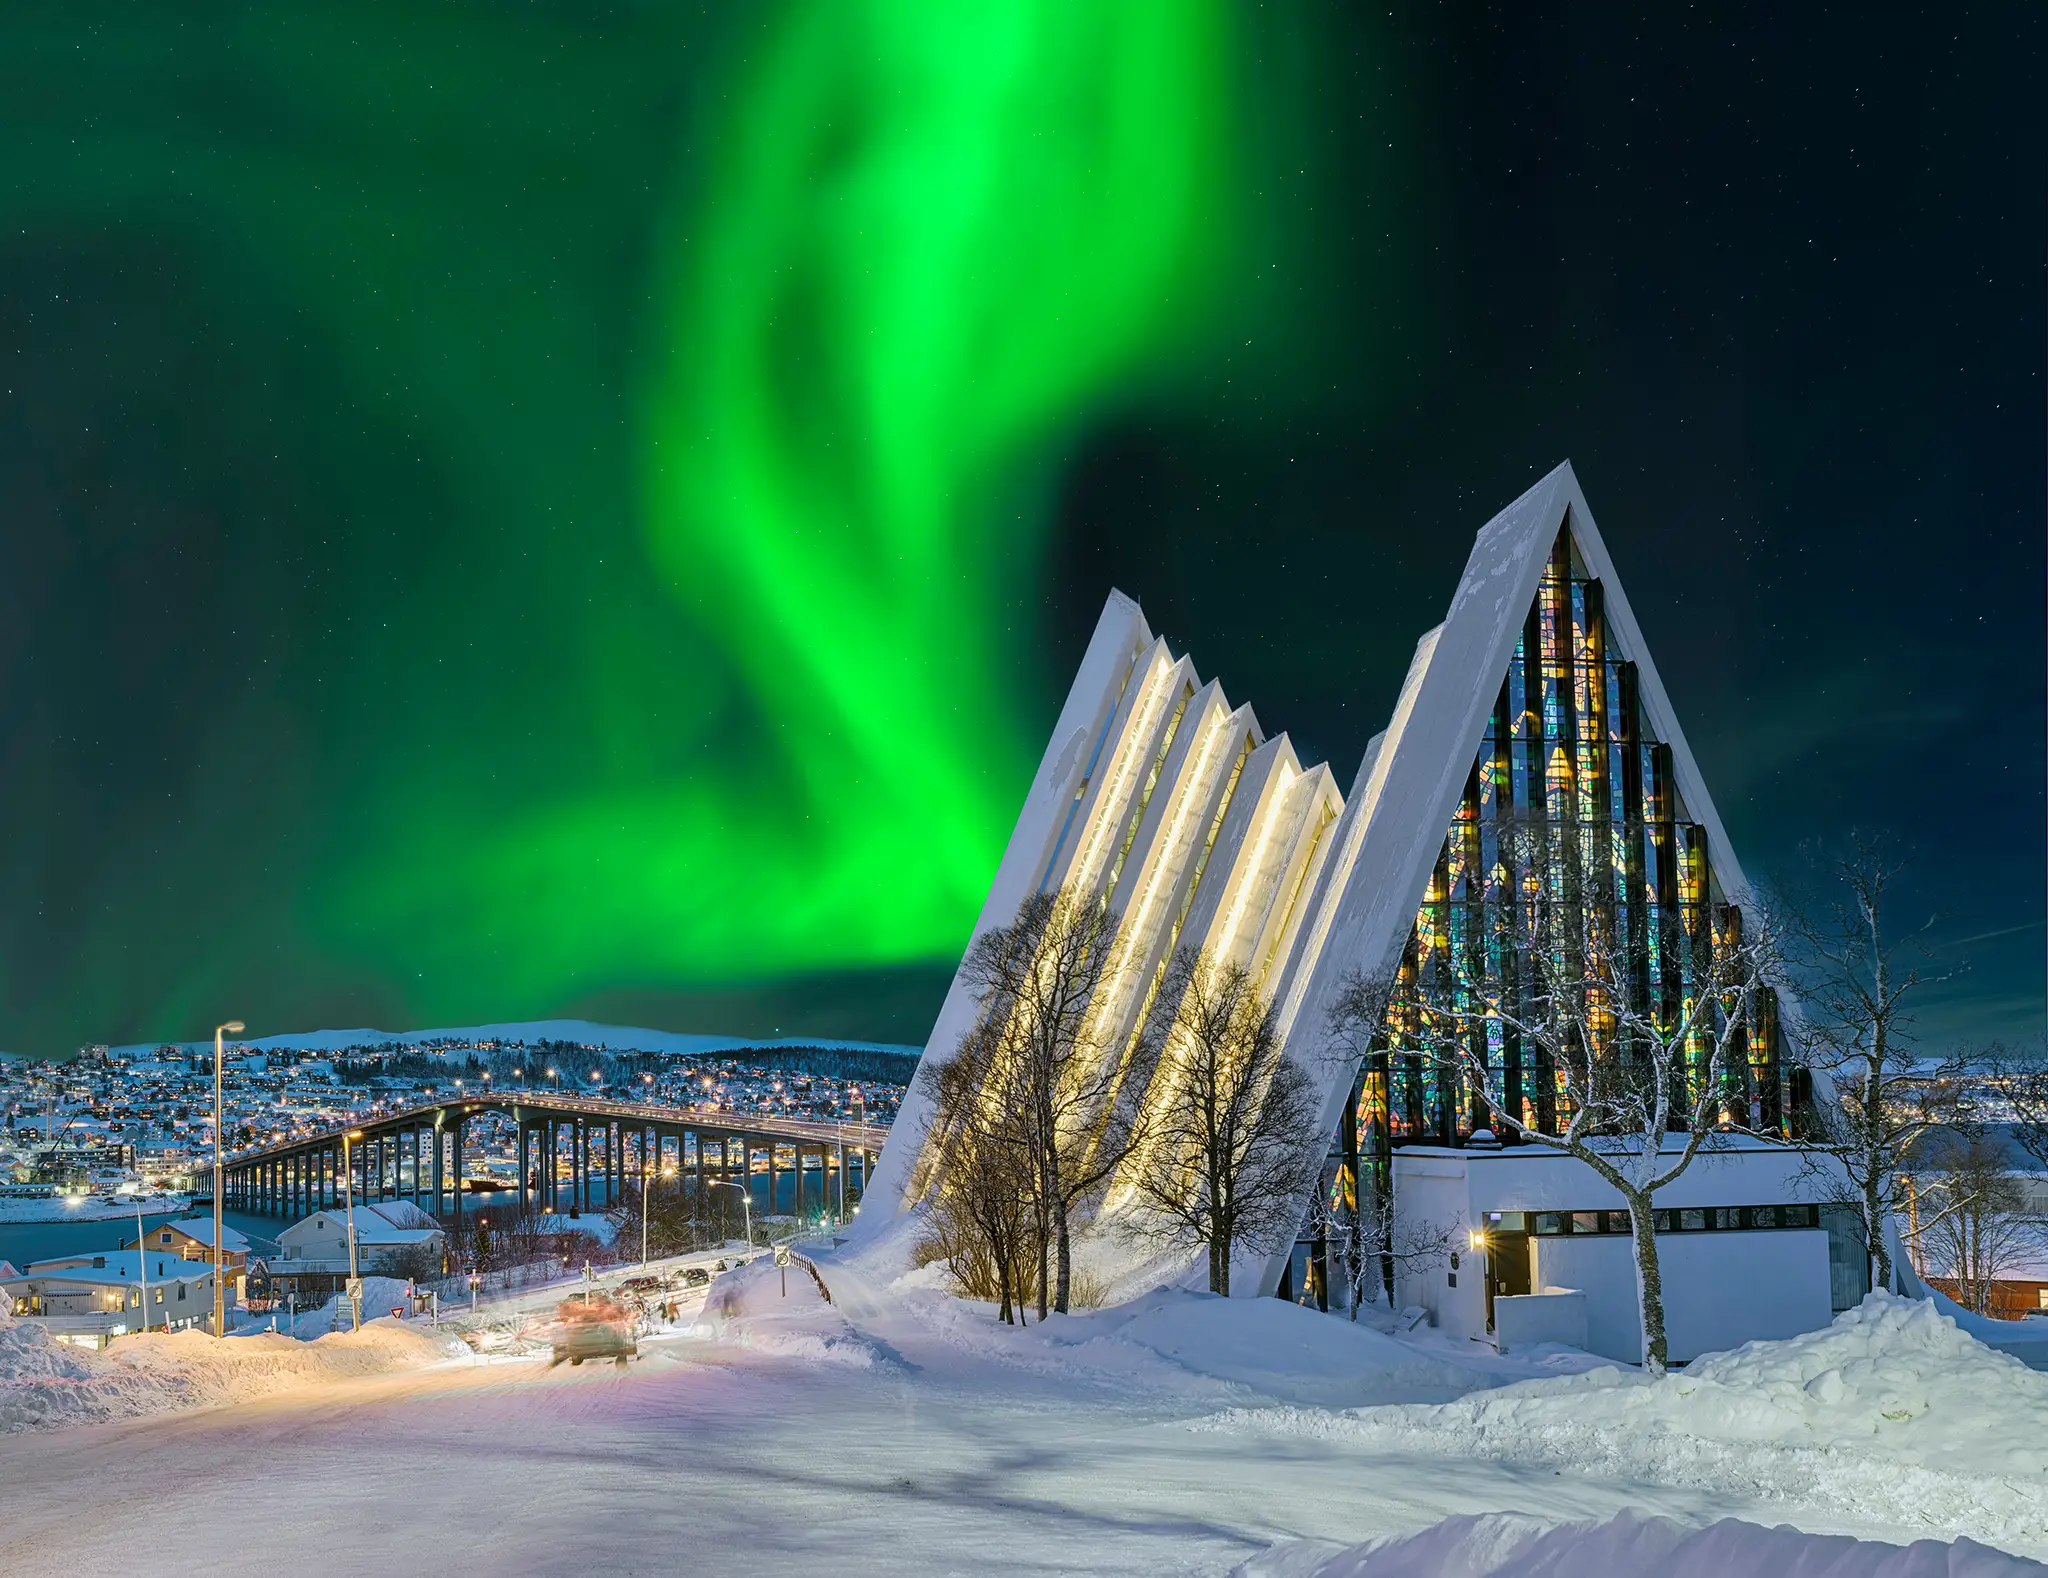 Arctic Cathedral in Tromso at night with aurora borealis in the sky.